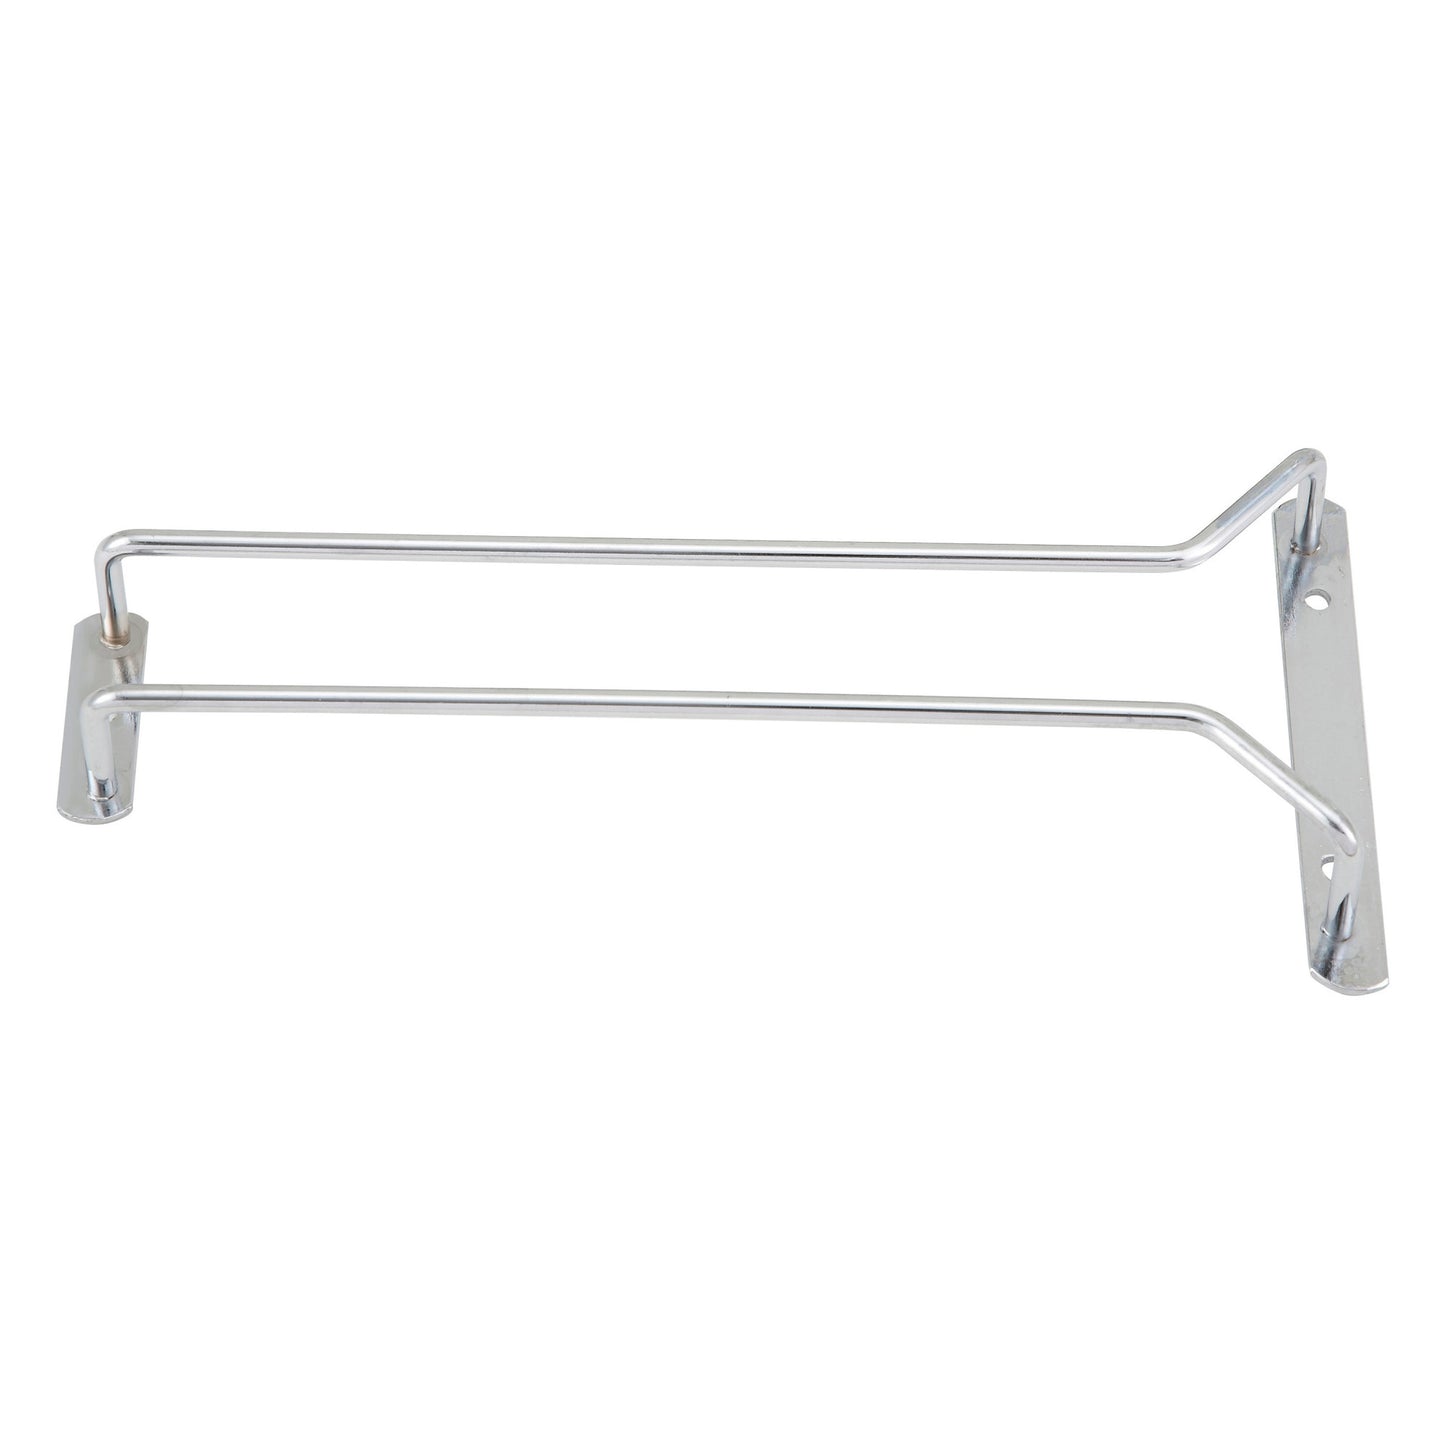 GHC-10 - 10" Wire Single Channel Glass Hanger